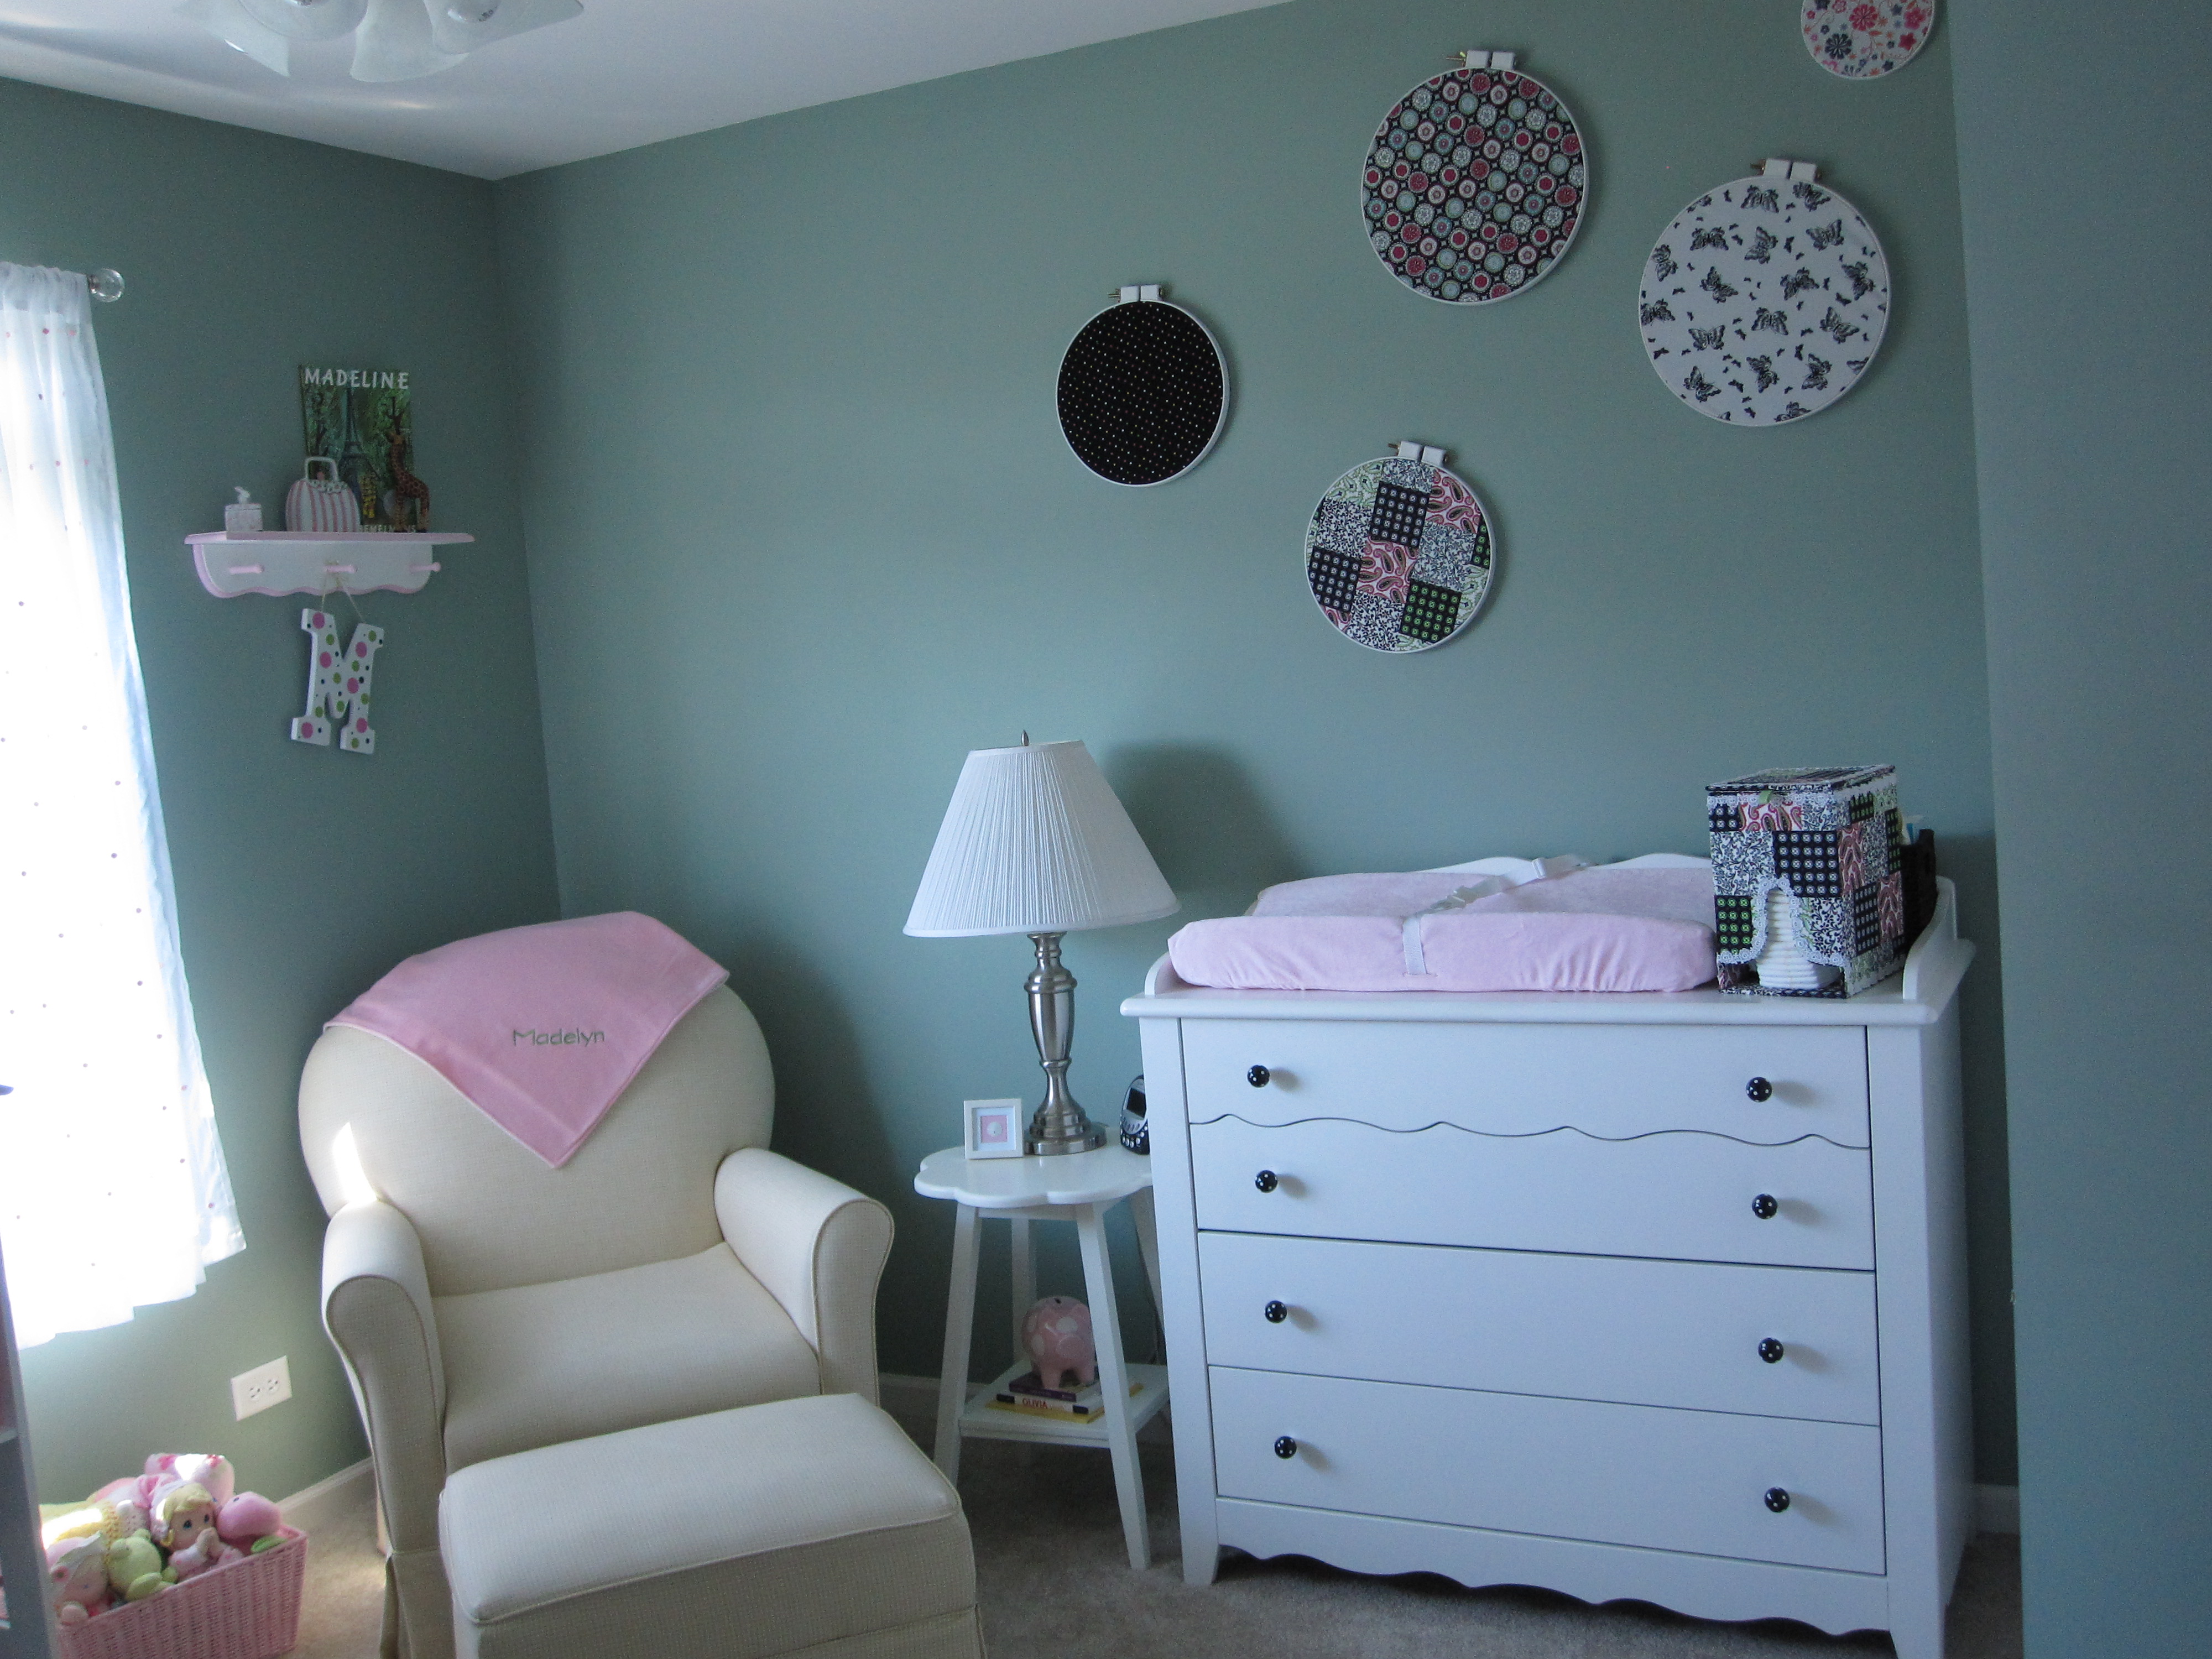 Nursery-Rocker and Changing Table